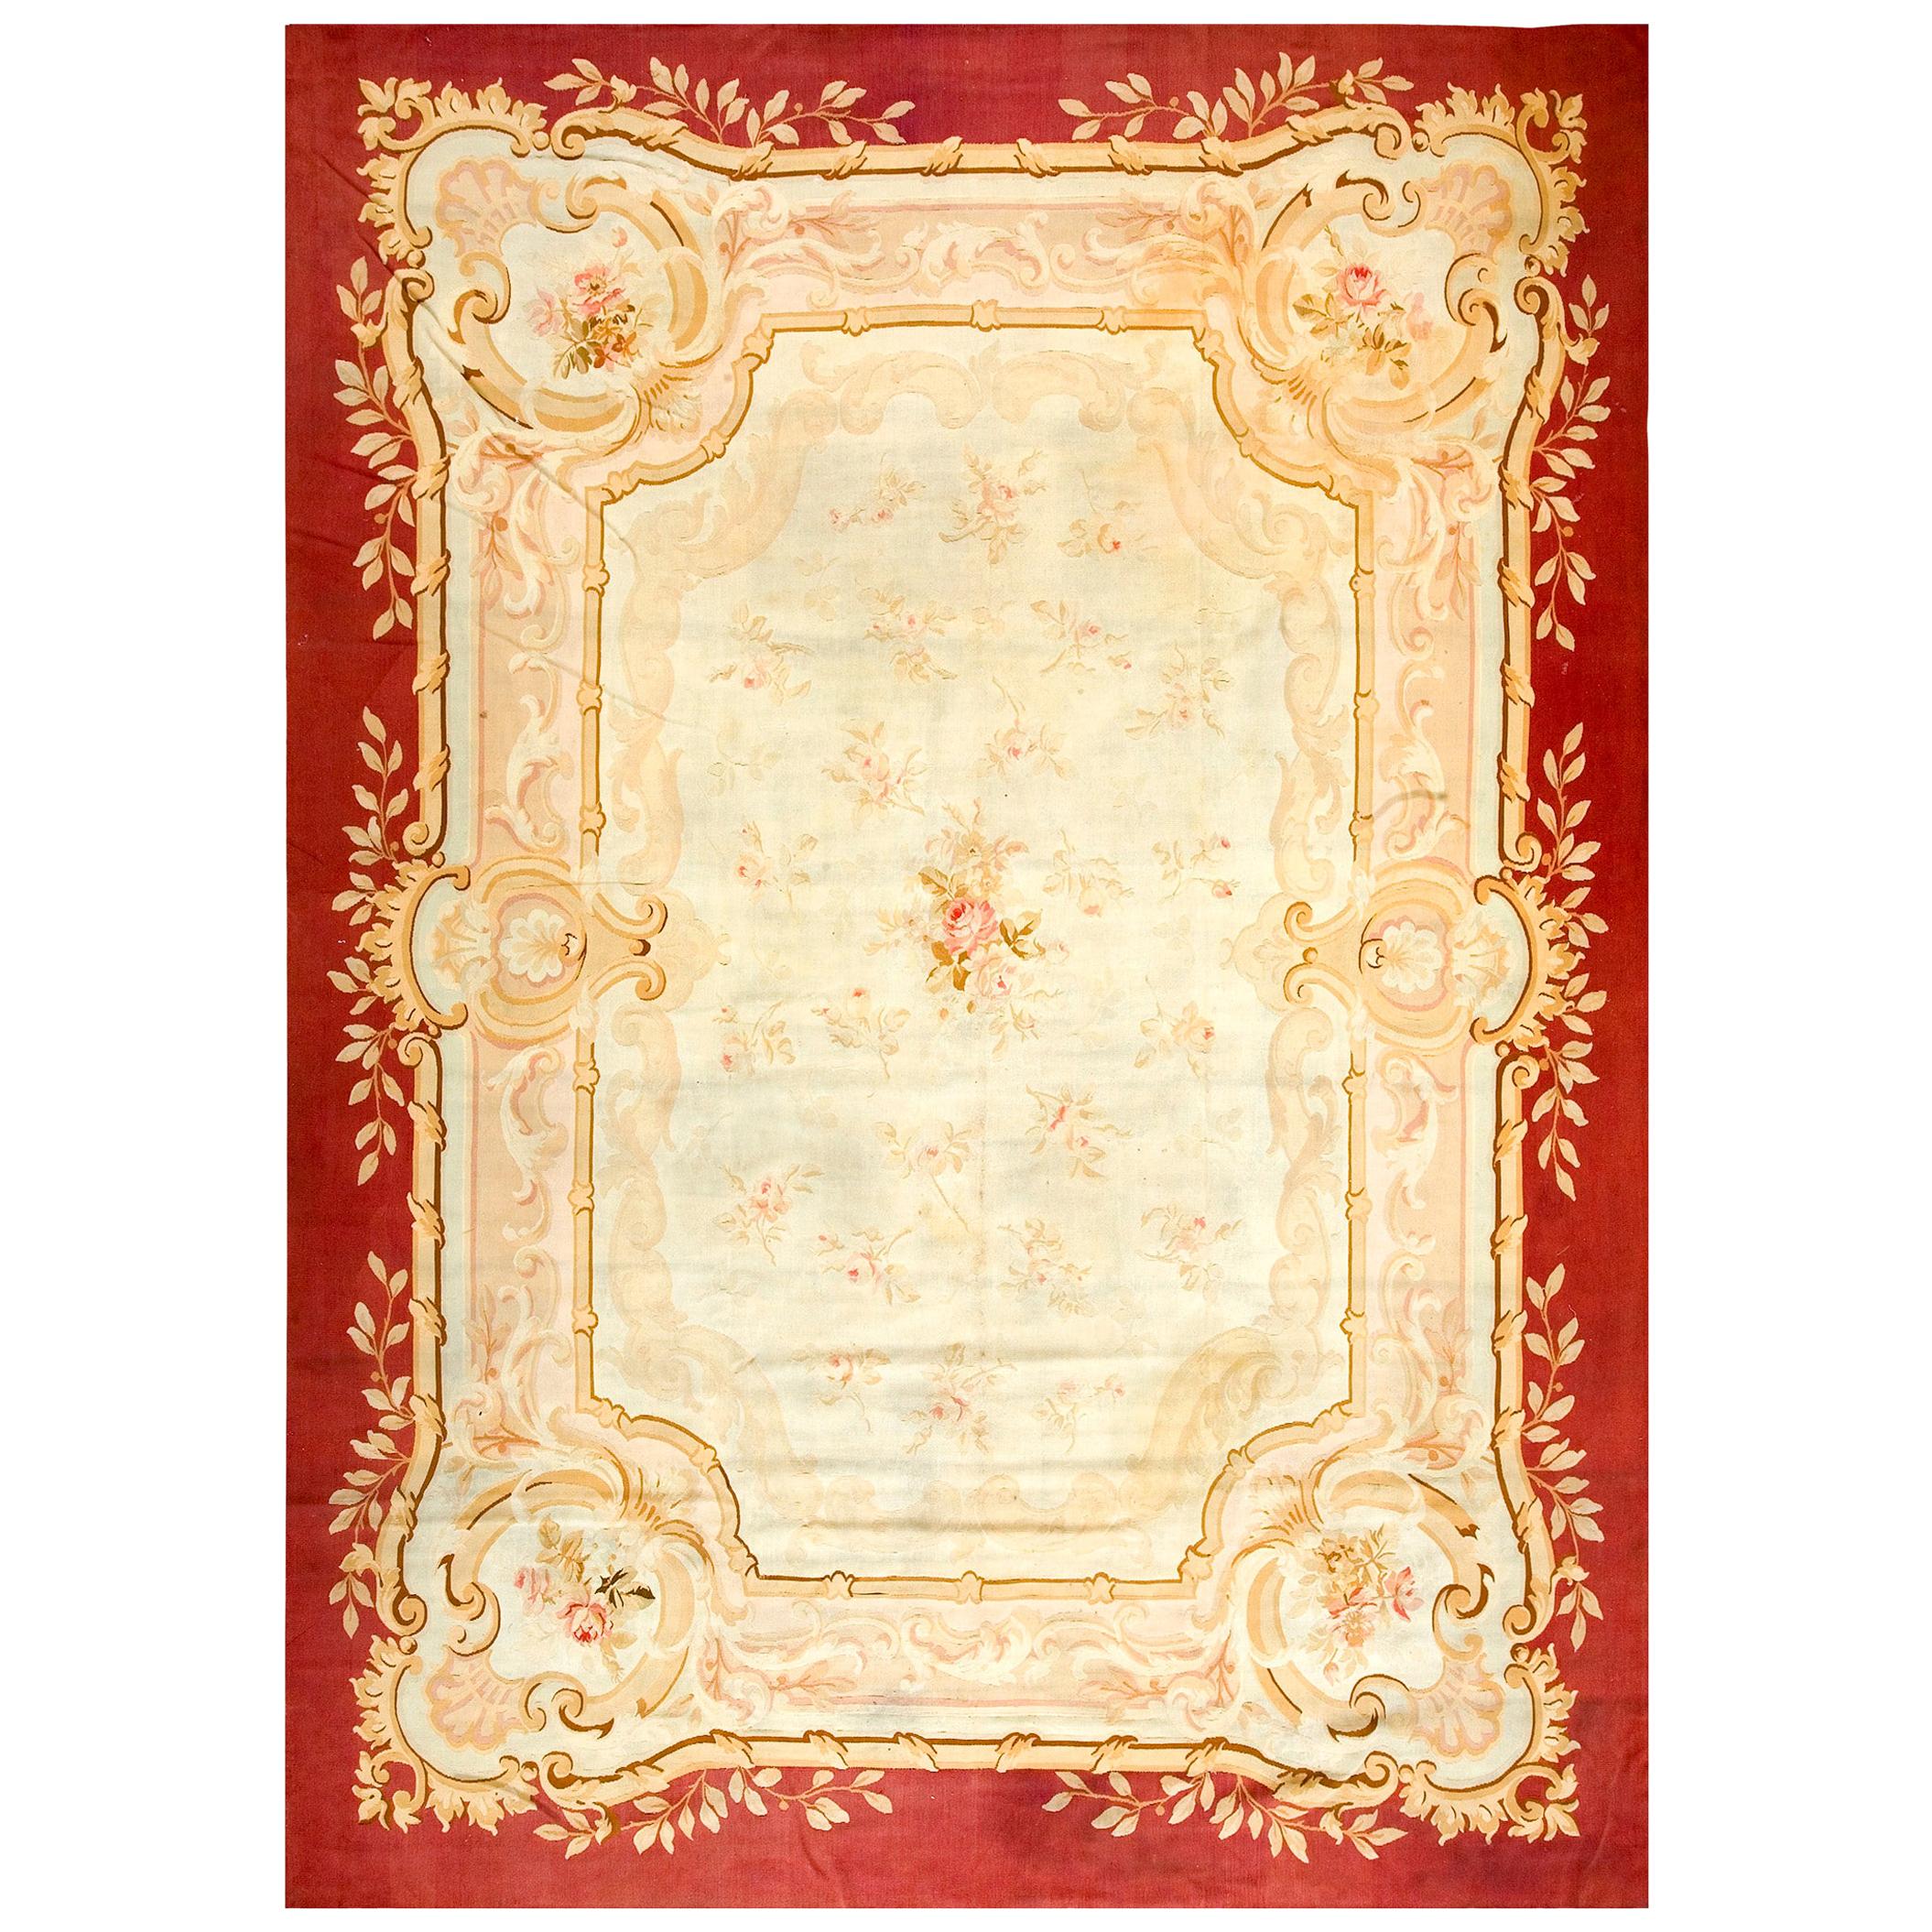 Late 19th Century French Aubusson Carpet ( 9'7" x 13'4" - 292 x 407 )